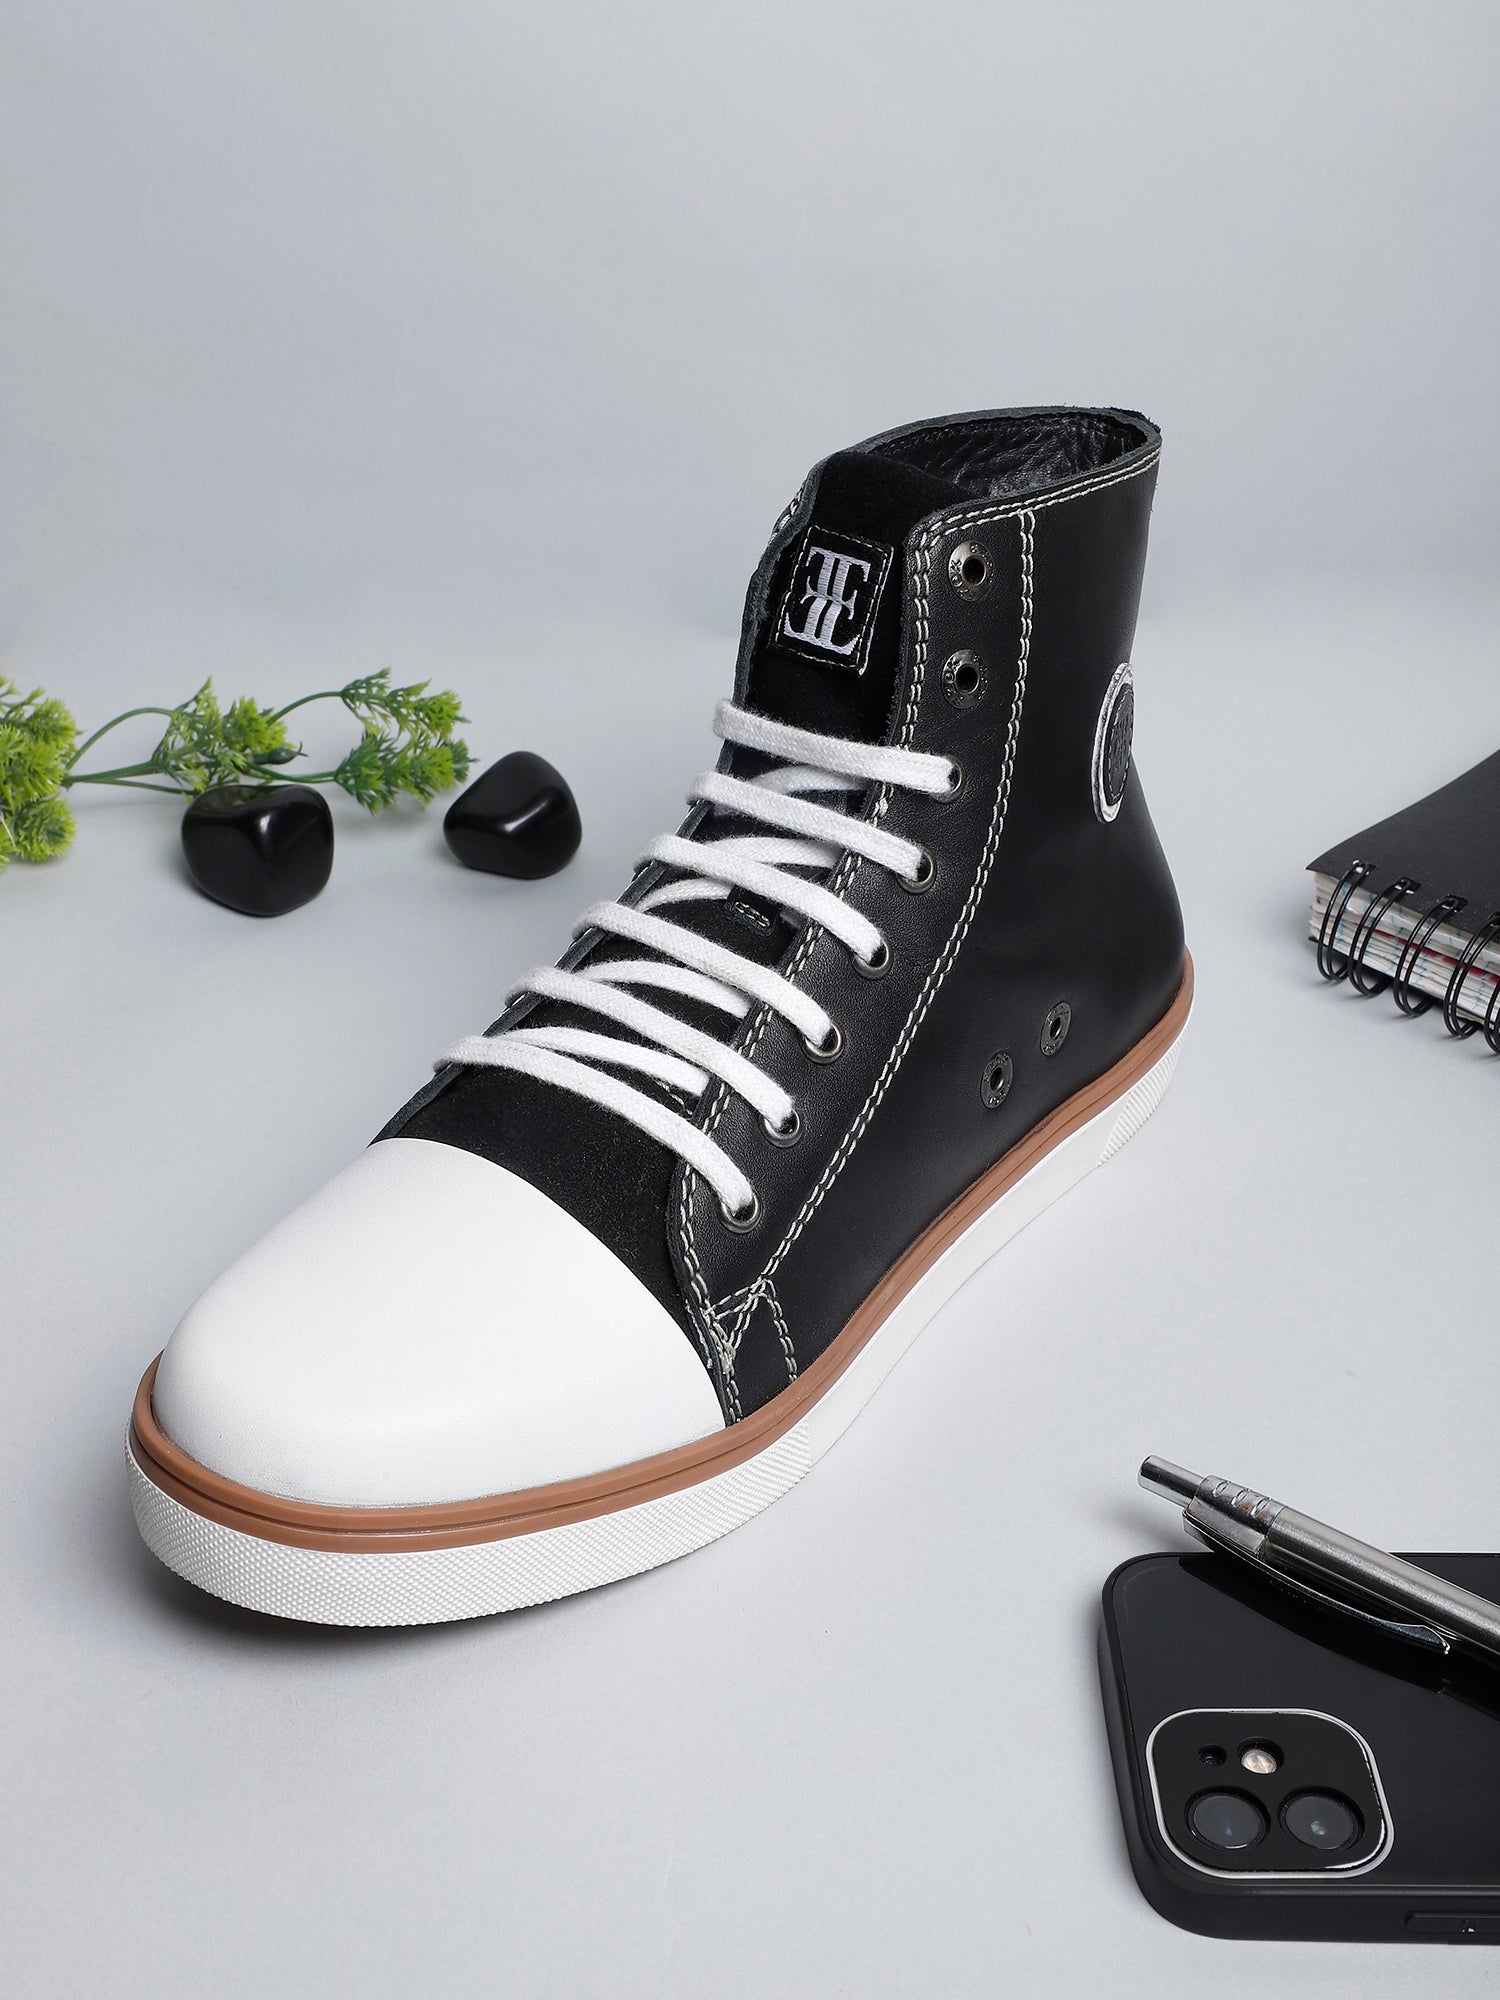 Light Weight Black Sneakers With Punching Brogue Oxford Lace-Up Closur